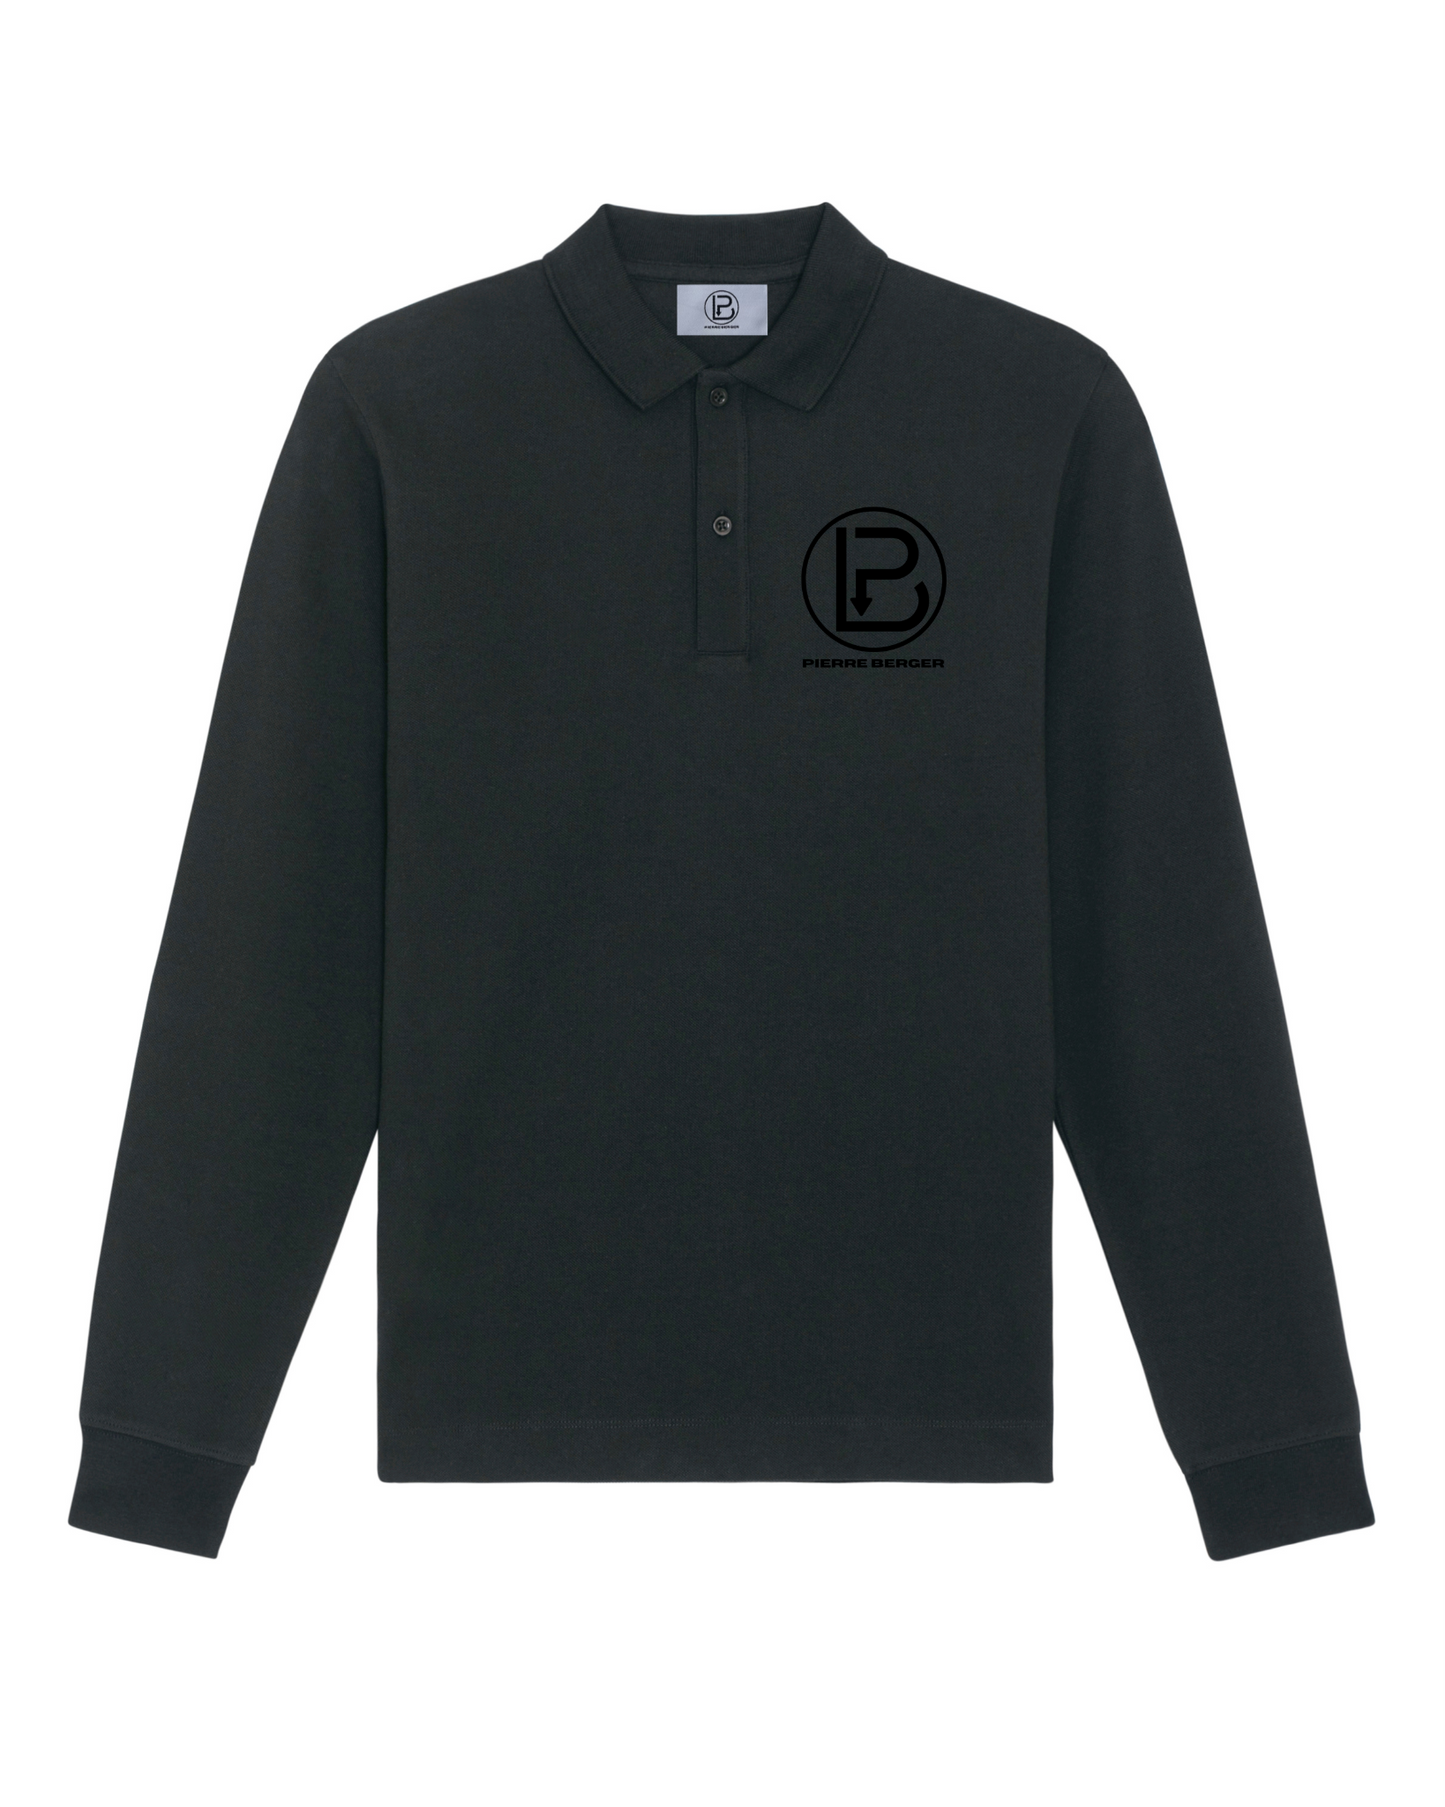 PIERRE BERGER - 100% organic cotton unisex long-sleeved polo shirt embroidery